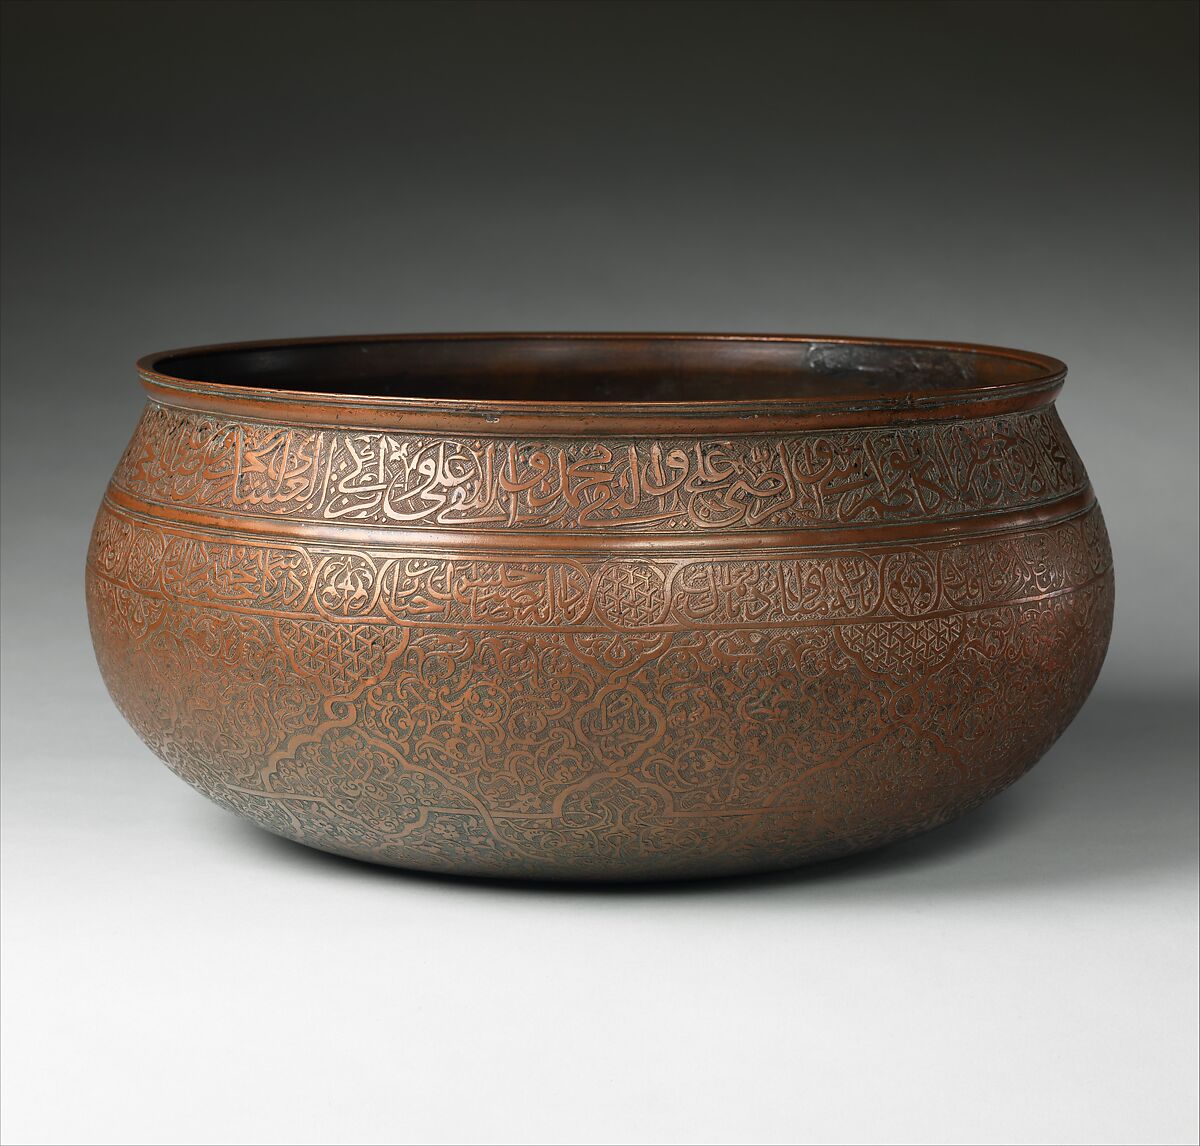 Inscribed Bowl, Al-Imami Sayyid Naqqash al-Husaini, Copper; tinned, engraved, and inlaid with black compound